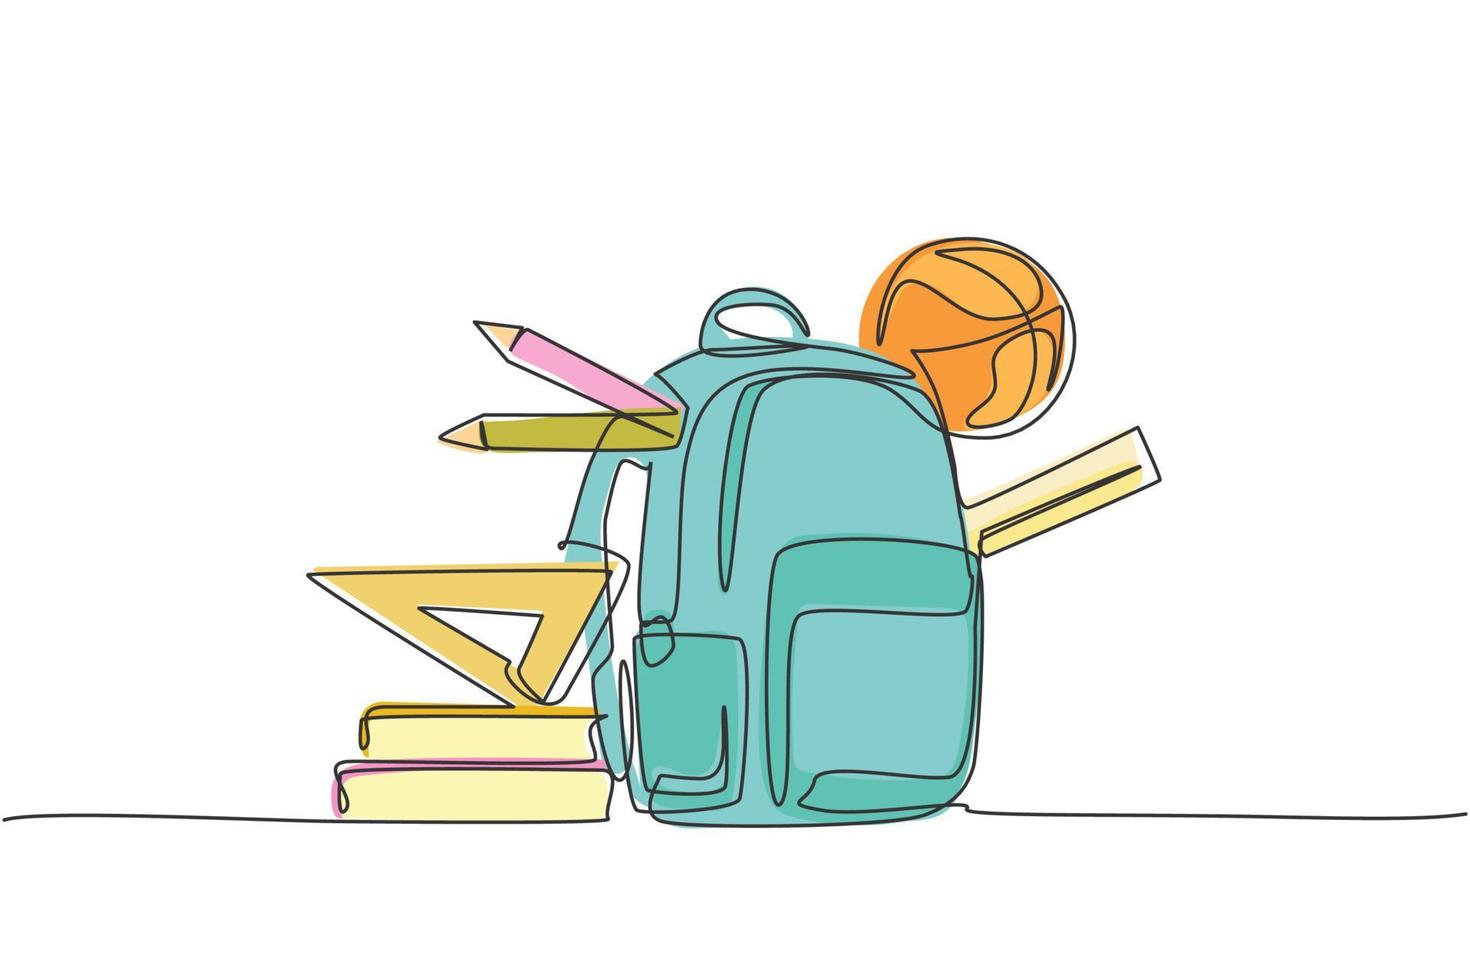 Single one line drawing of school bag, basket ball, ruler, pencil and pen set. Back to school minimalist, education concept. Continuous simple line draw style design graphic vector illustration